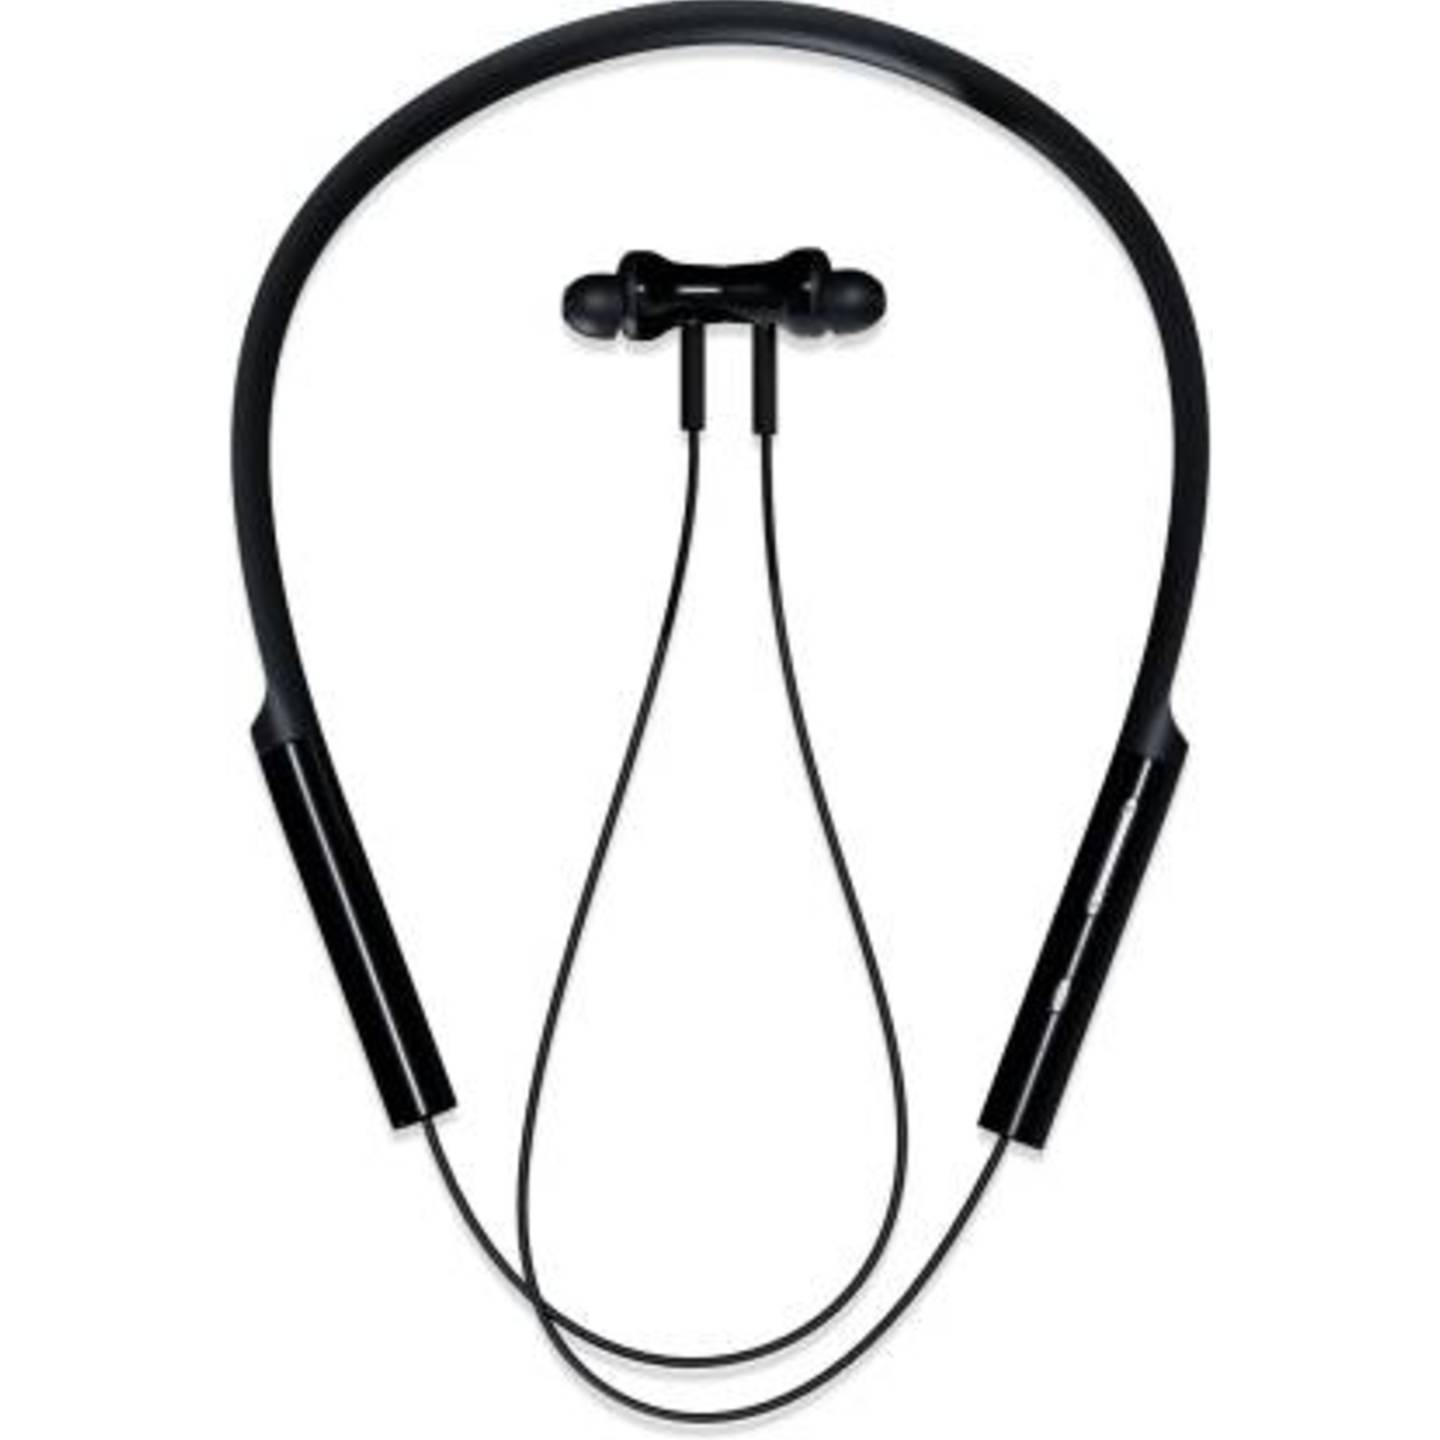 Mi Neckband Bluetooth Headset  (Black, Wireless in the ear)#JustHere